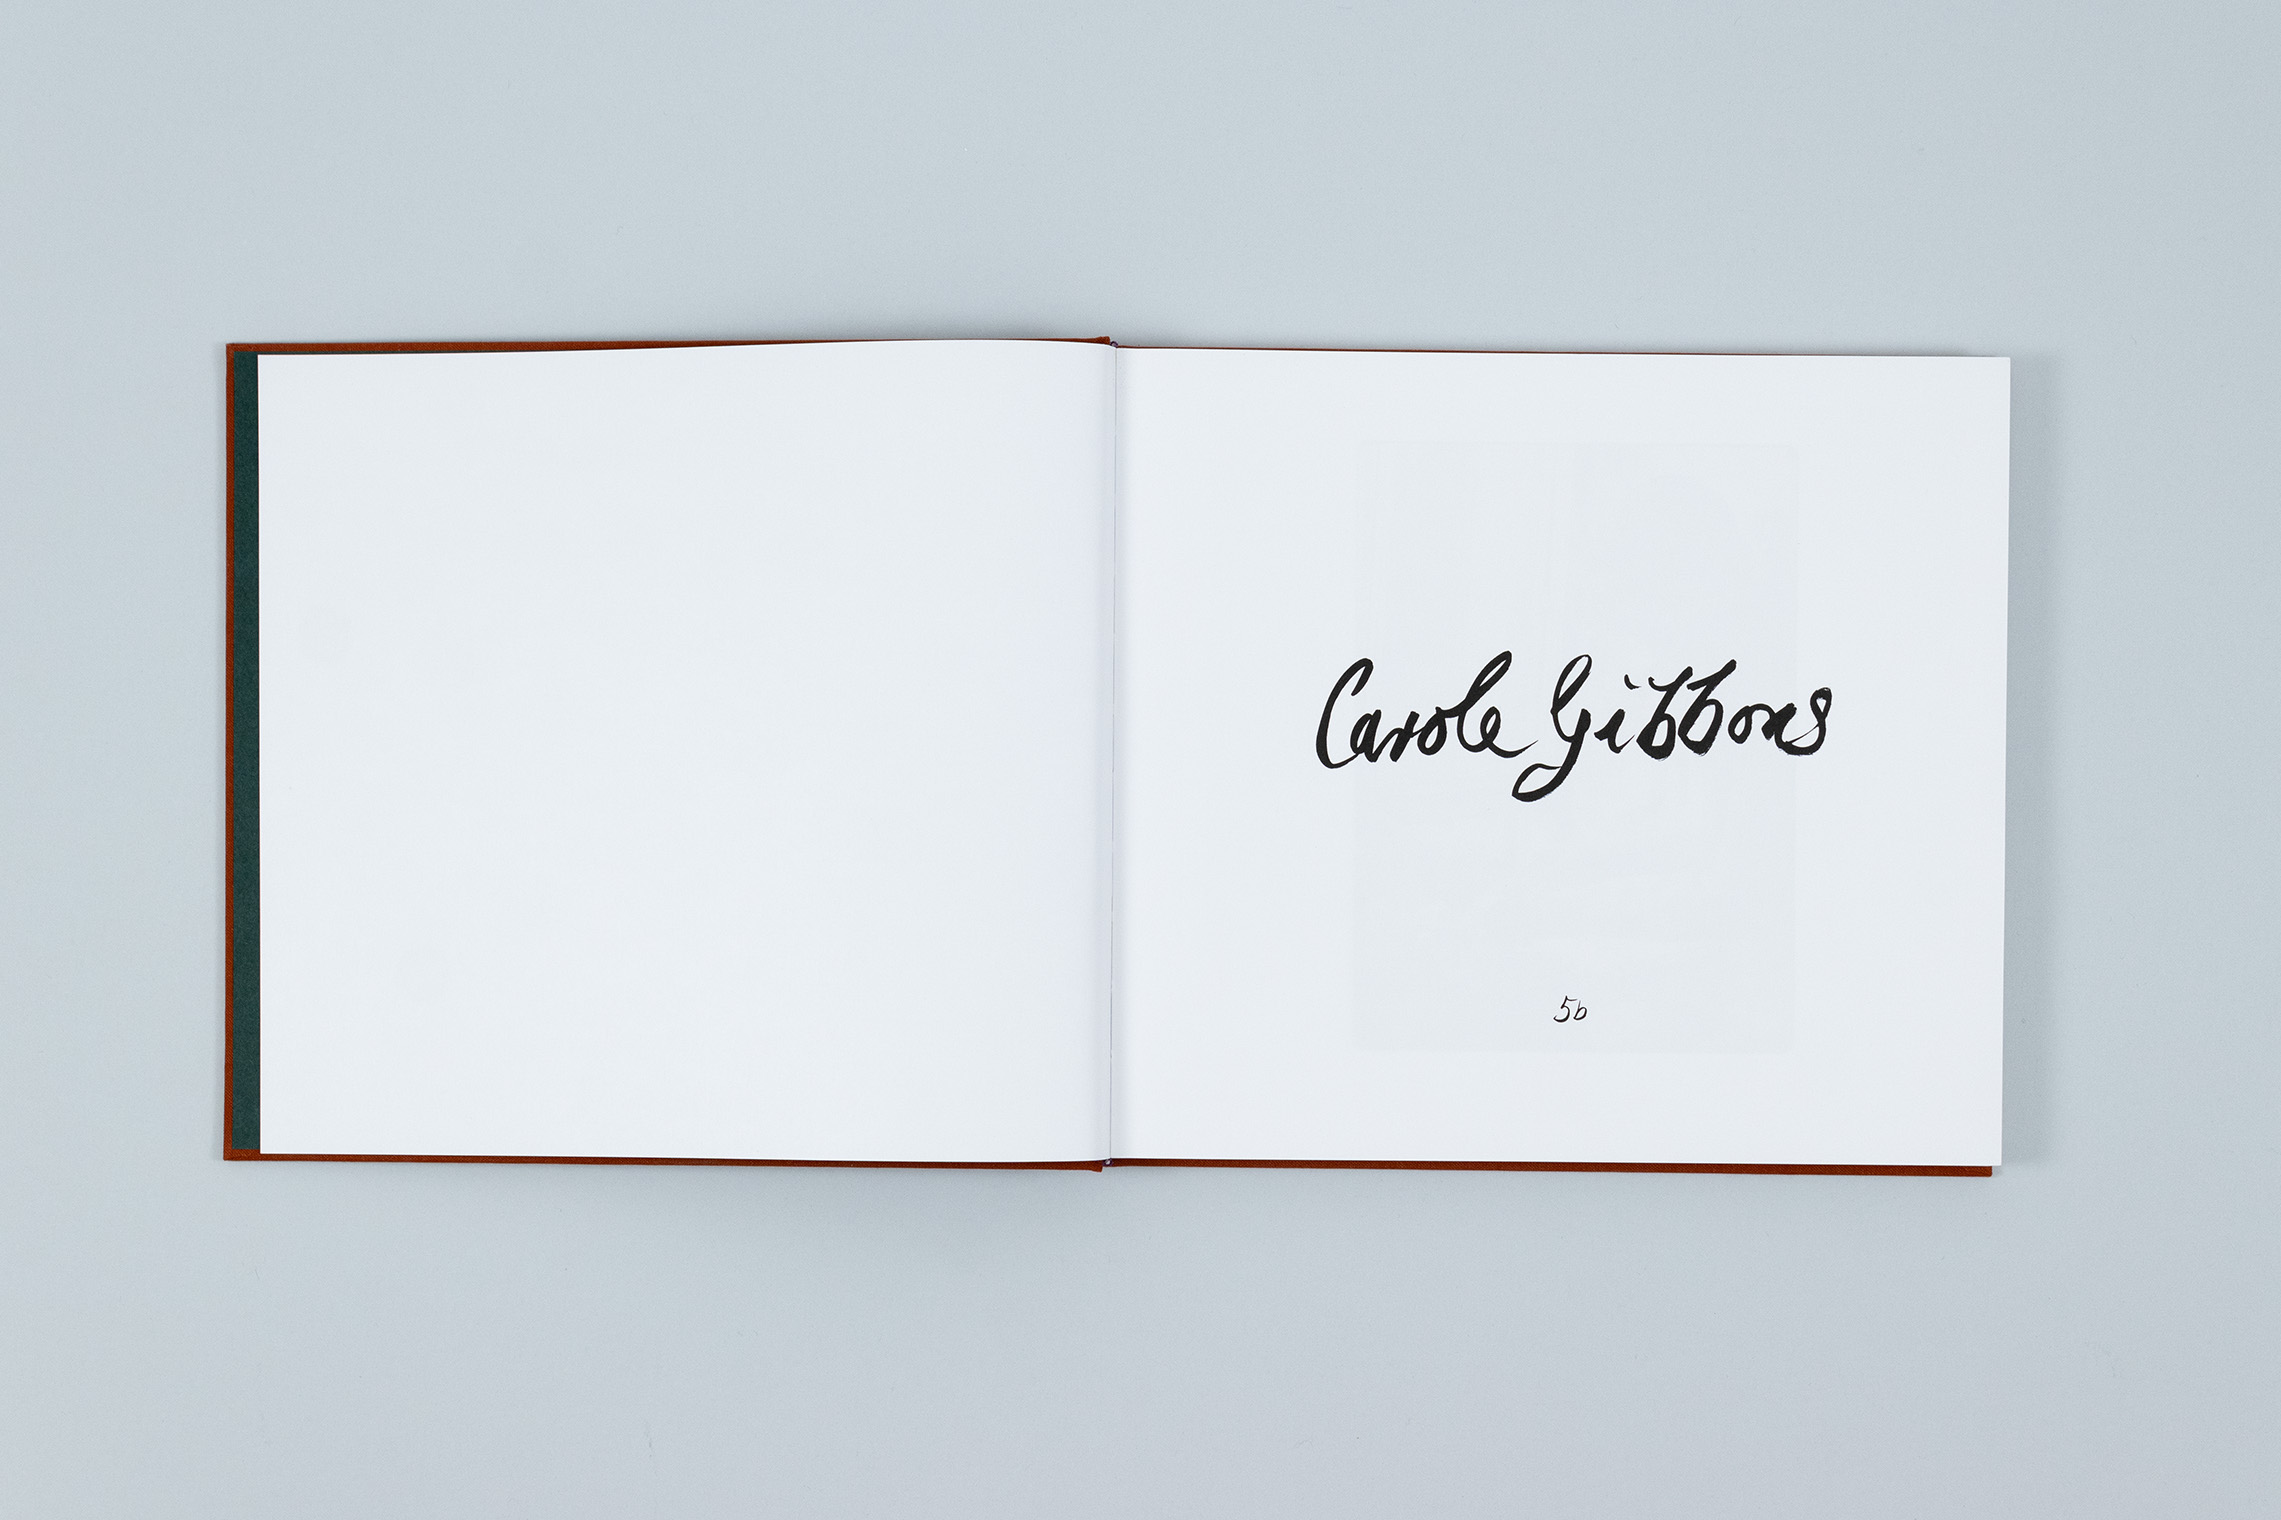 Carole Gibbons monograph title spread with handwritten title